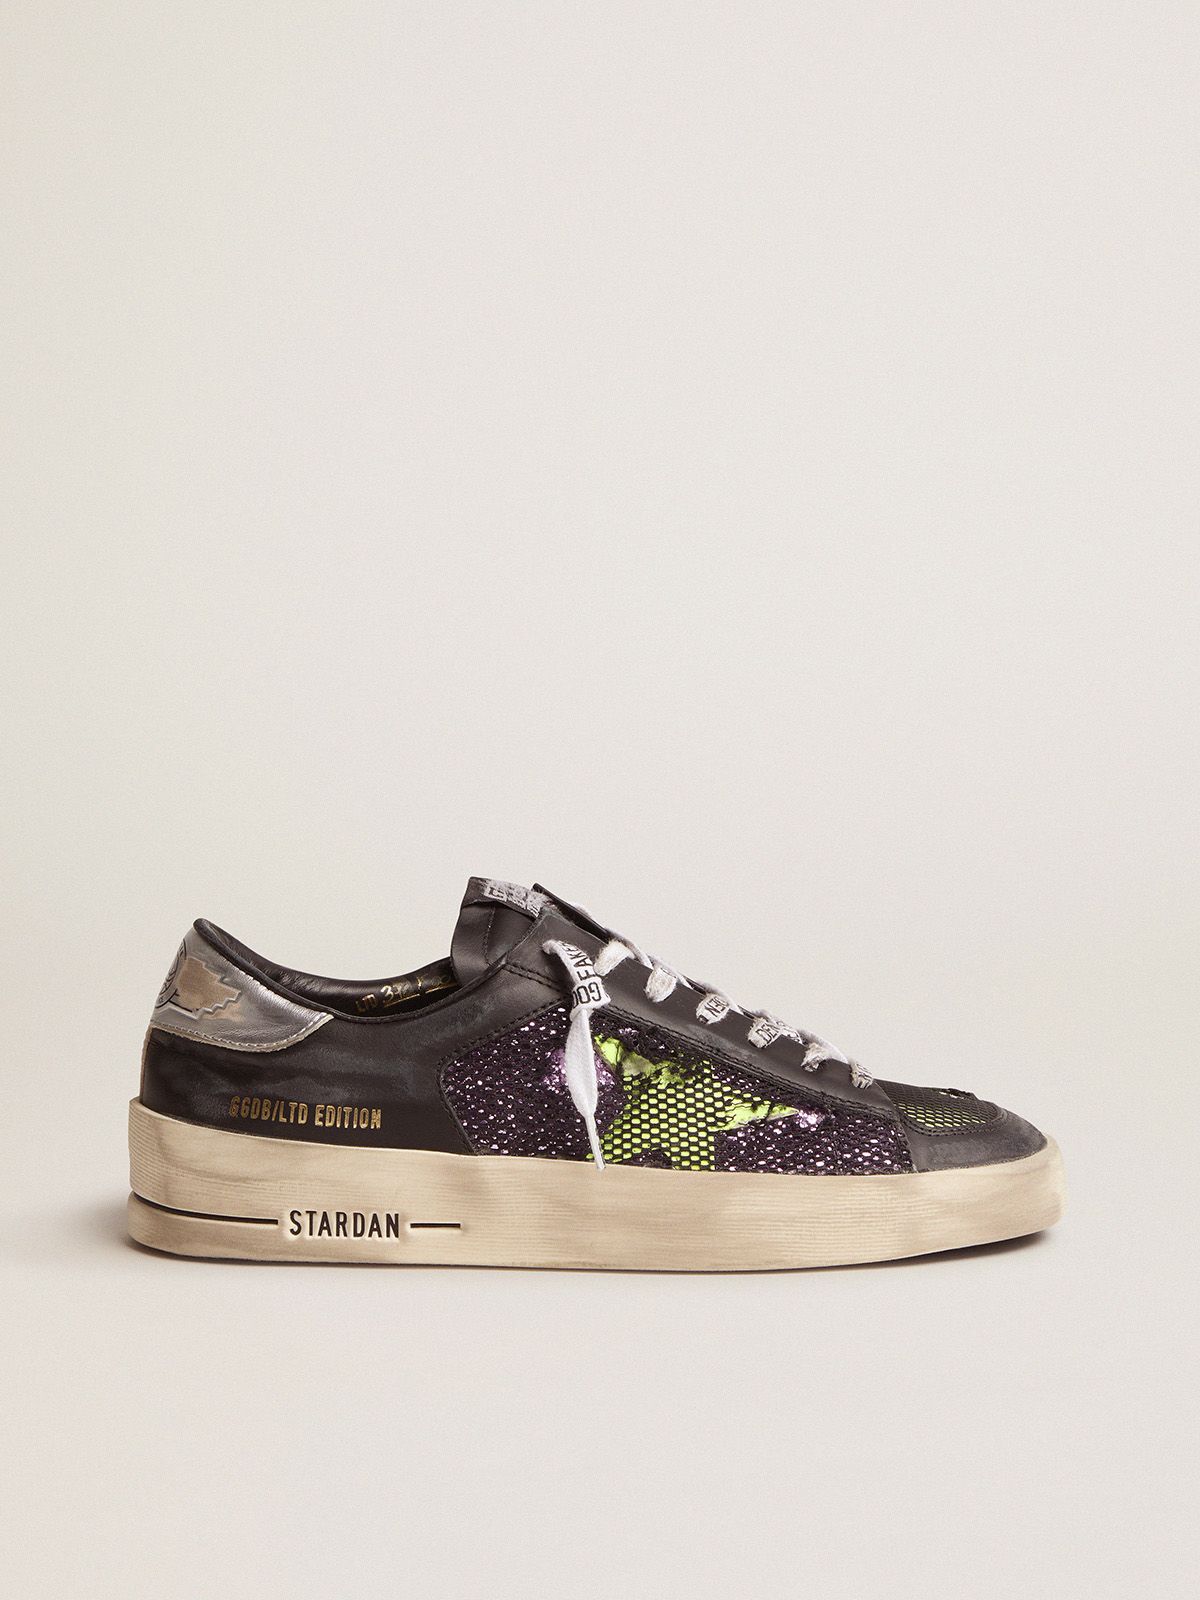 golden goose Stardan fluorescent Limited Edition LAB with details sneakers Women’s and yellow glitter